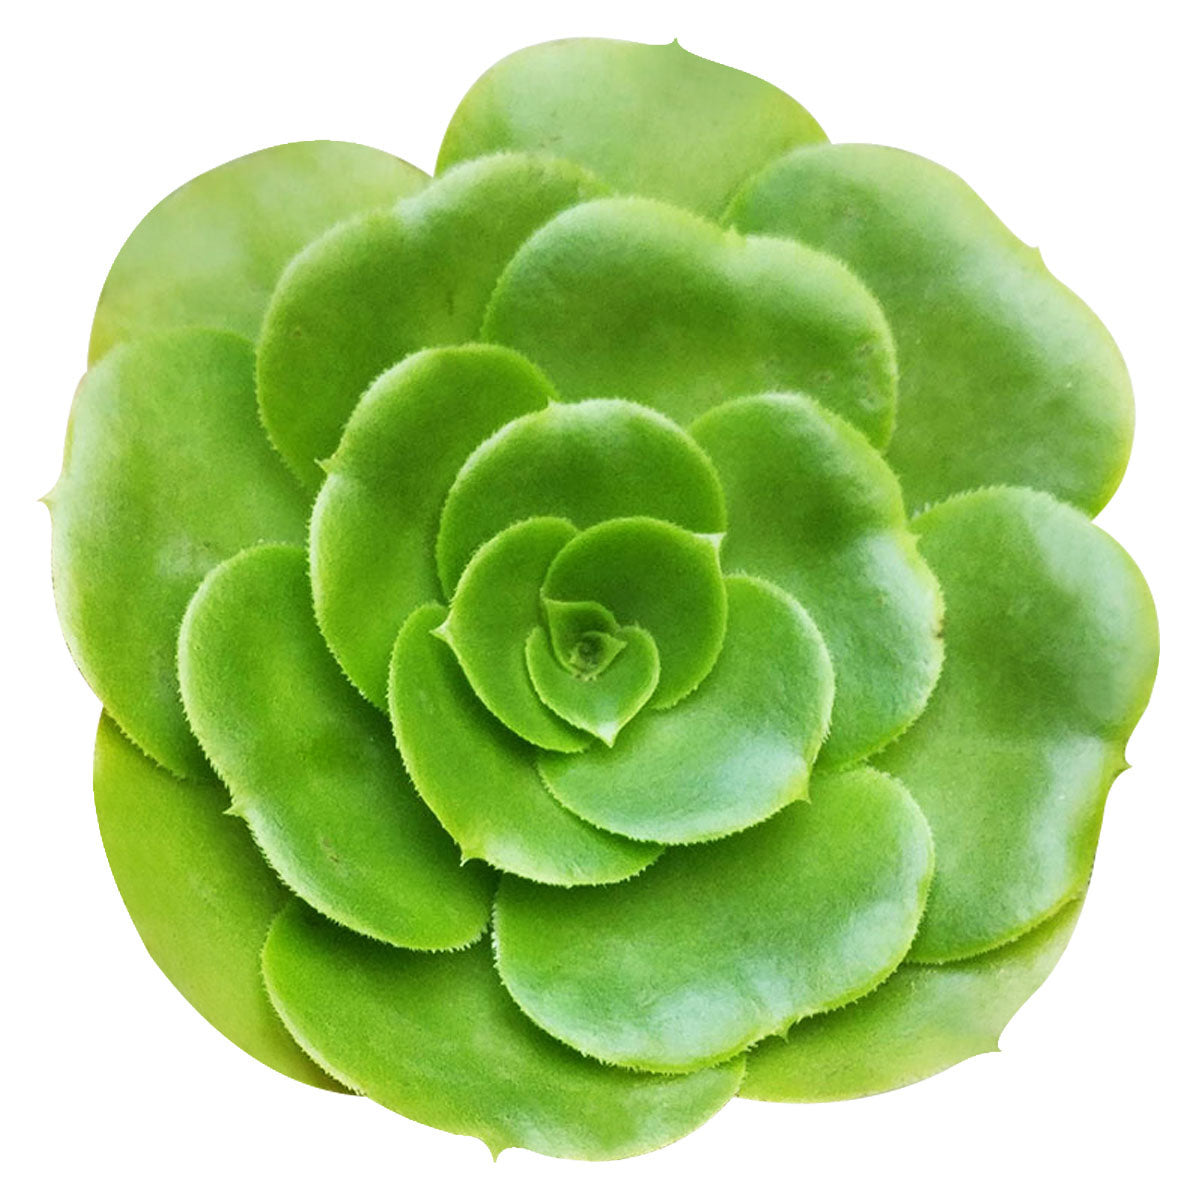 Green Platters, succulents store in CA, succulents garden, succulent care tips, cactus, succulents shop in California, succulent subscription, how to grow succulents, succulent plant, Green Platters in California, How to grow Green Platters